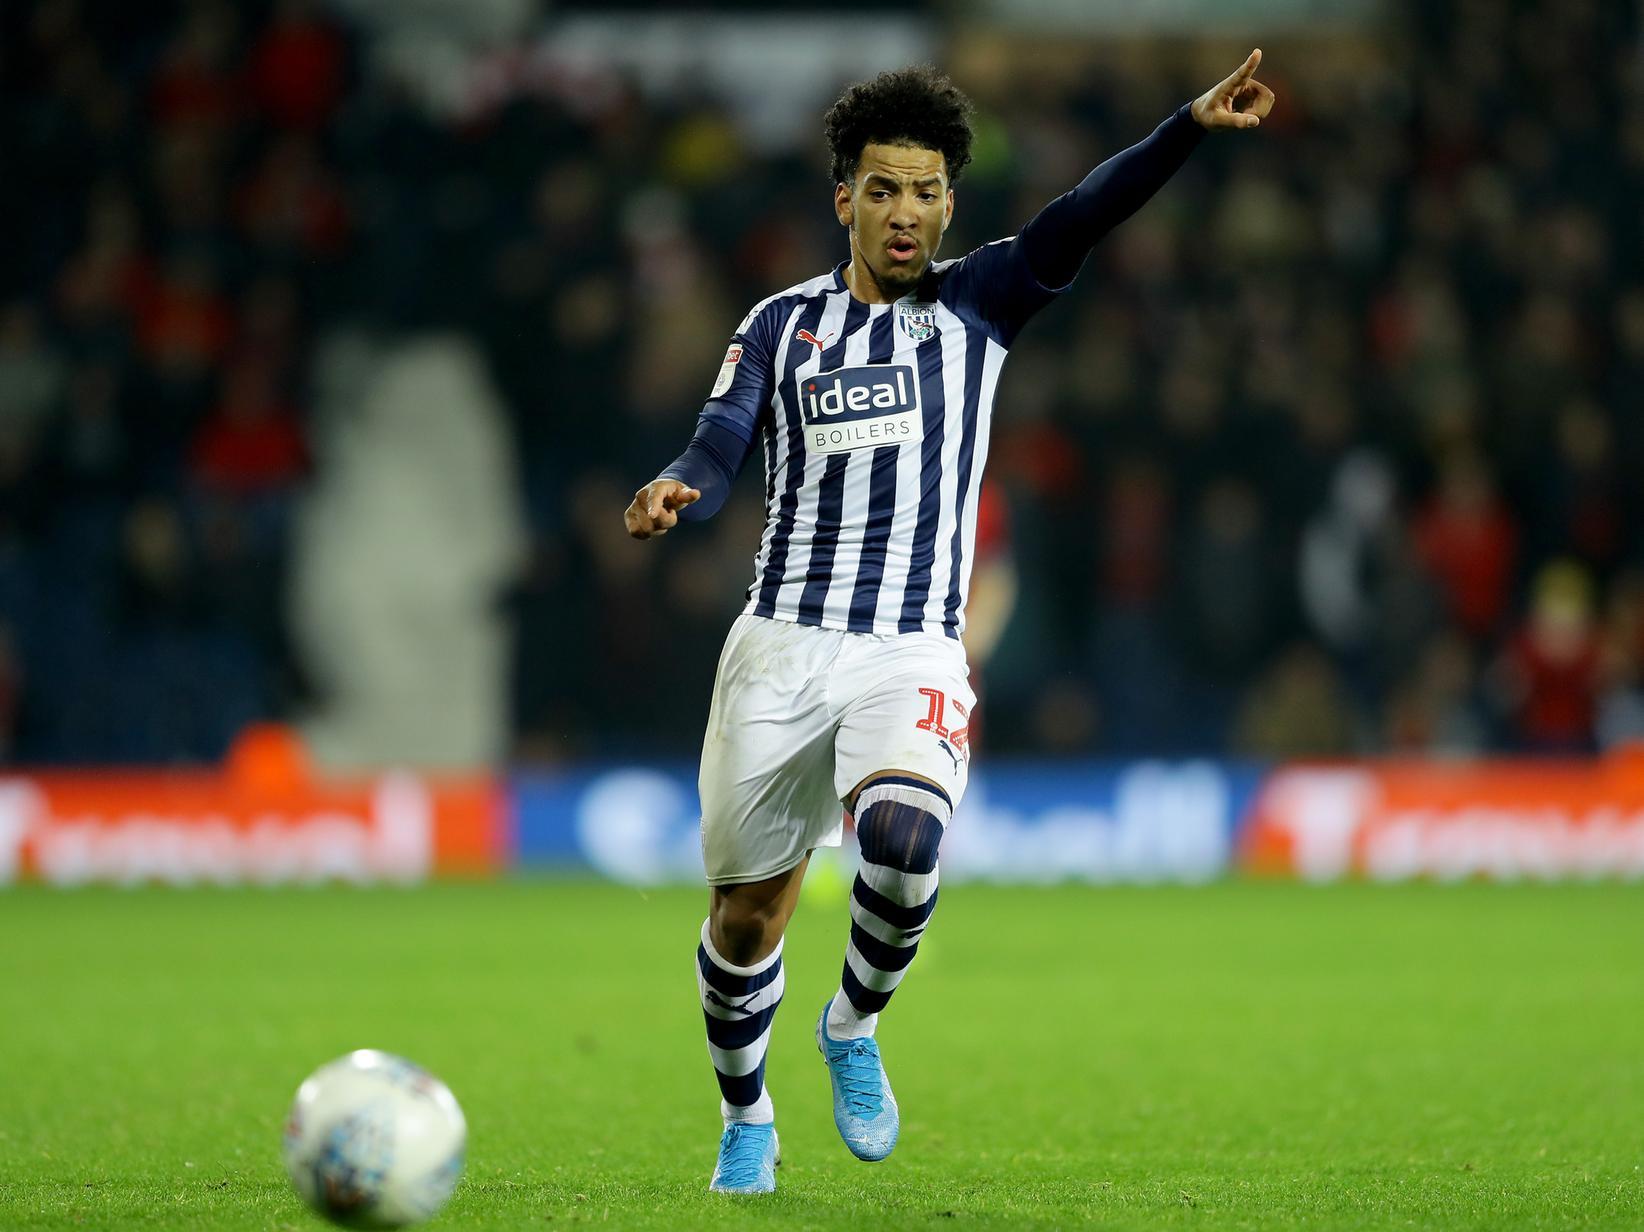 Matheus Pereira (West Brom) - probably the breakout star of the Championship season in attack. A lovely player, and he cut open Leeds on a number of occasions.